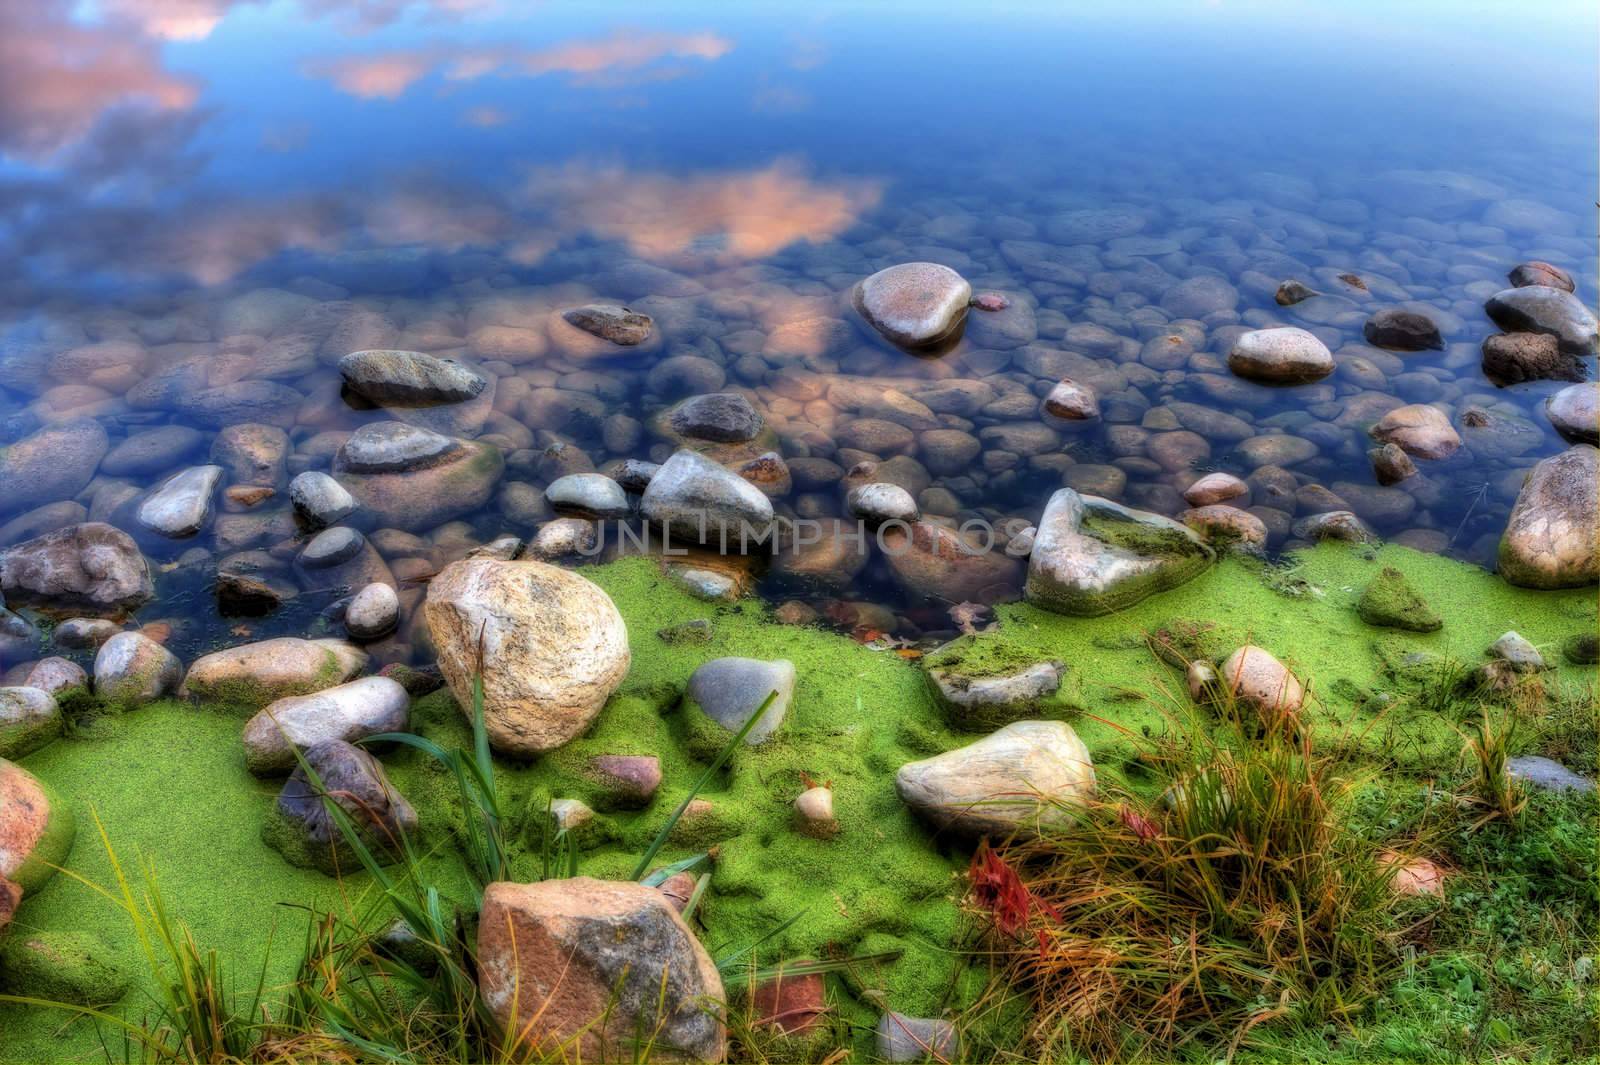 HDR of a Rocky River Bank by Coffee999